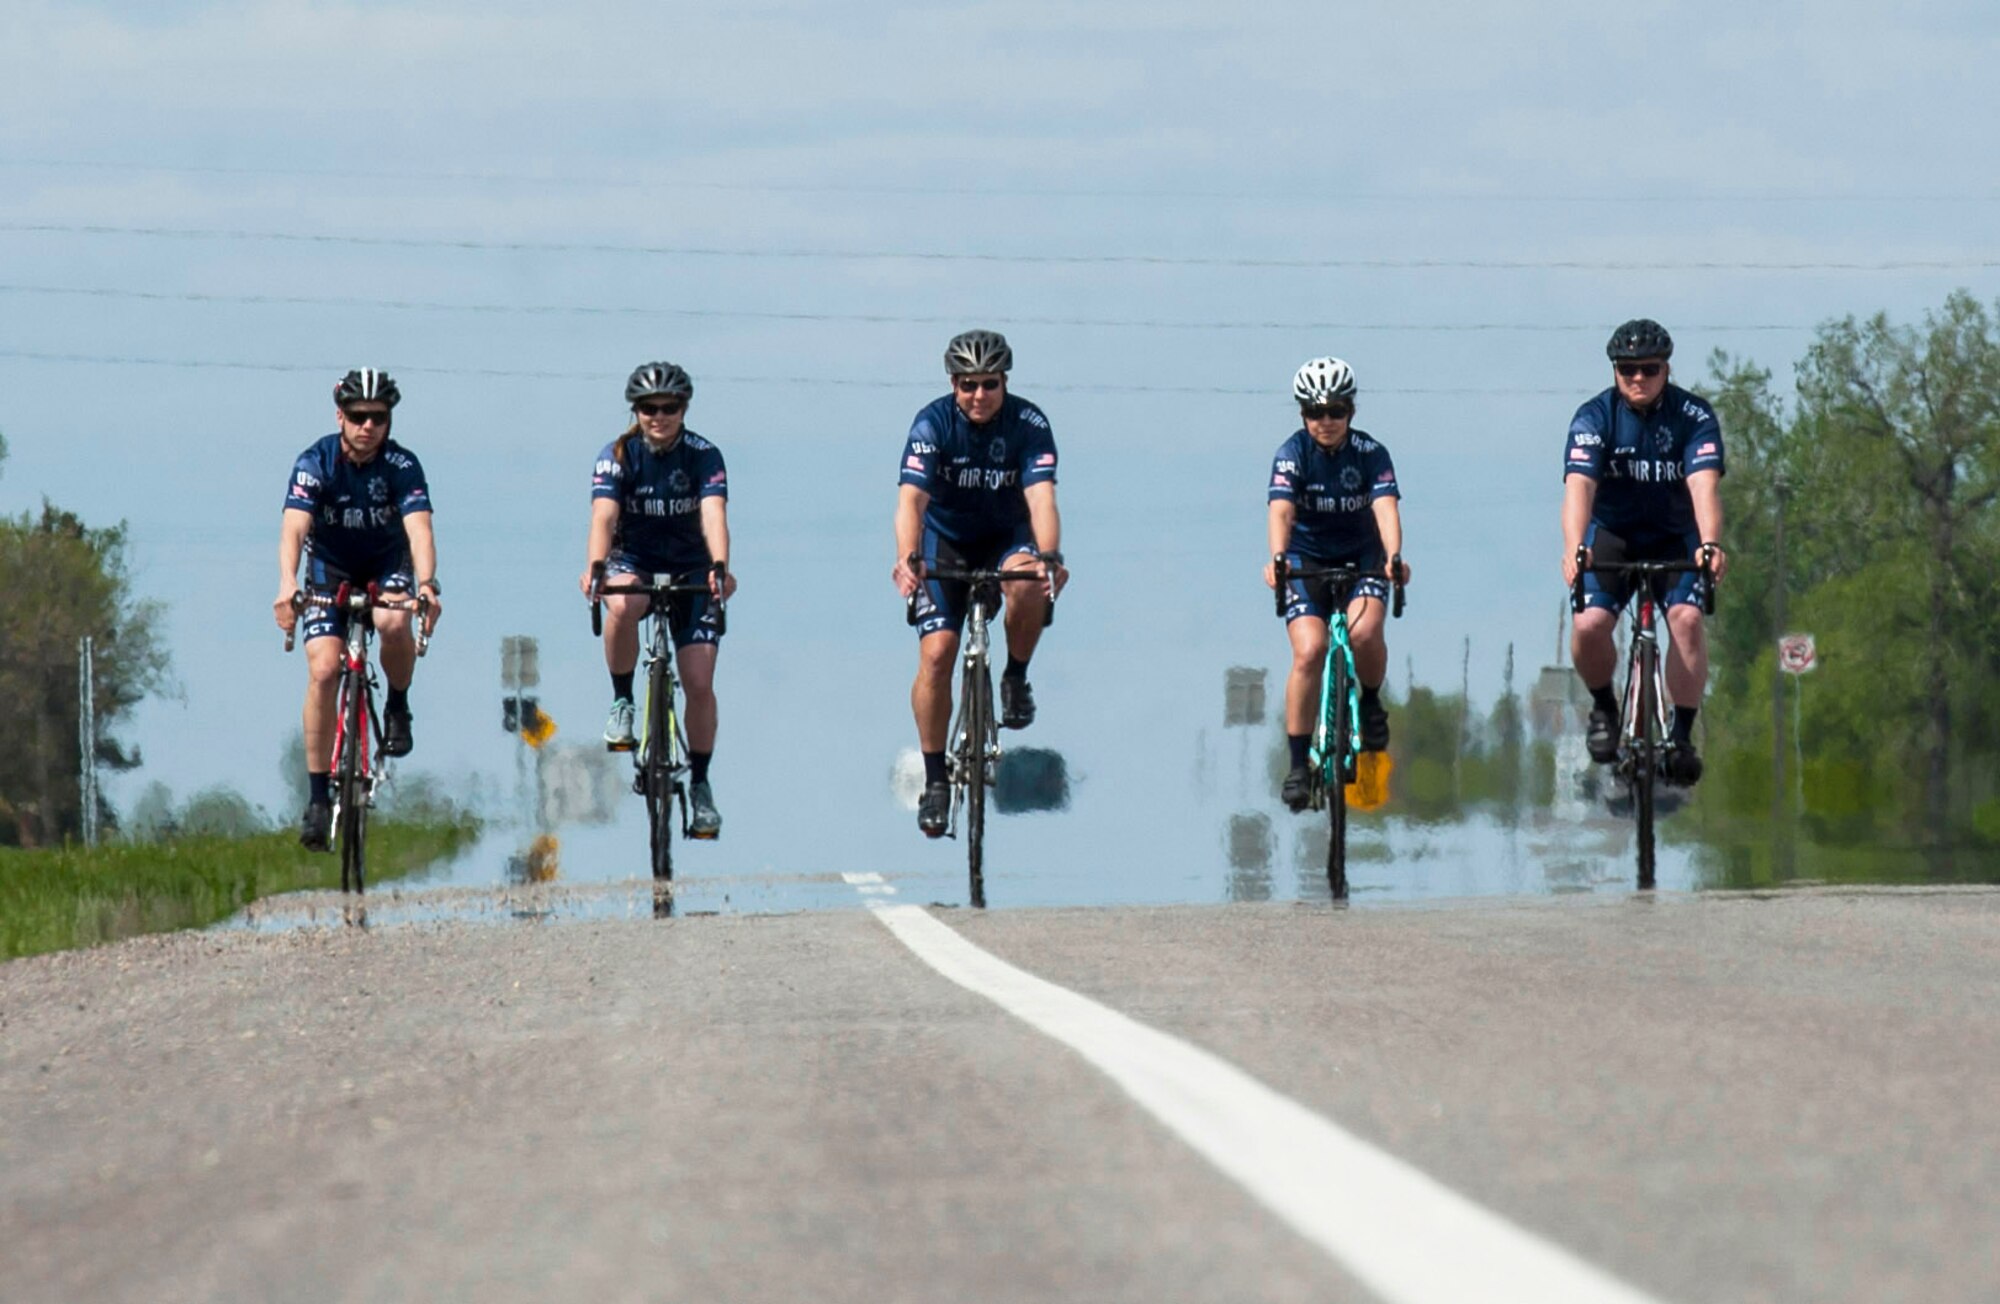 Members of the Air Force Cycling Team ride near Minot Air Force Base, N.D., May 17, 2017. There are six Minot Air Force Base Airmen on the Air Force Cycling Team, which has more than 150 cyclists Air Force-wide. (U.S. Air Force photo/Airman 1st Class Jonathan McElderry)